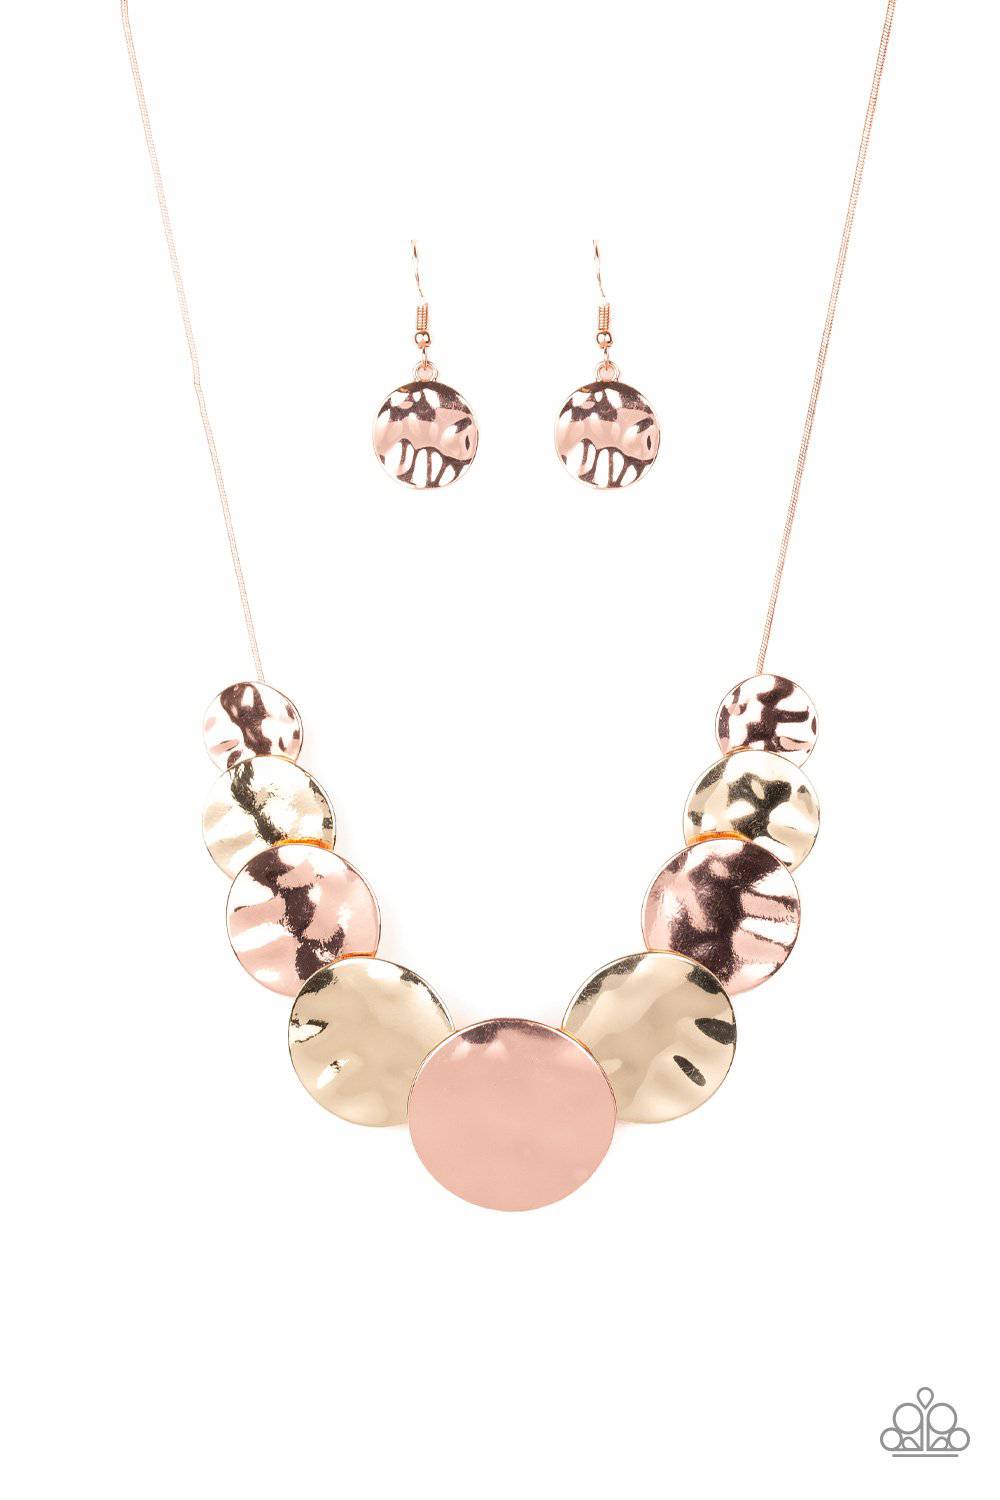 A Daring DISCovery - Copper & Gold Necklace - Paparazzi Accessories - GlaMarous Titi Jewels